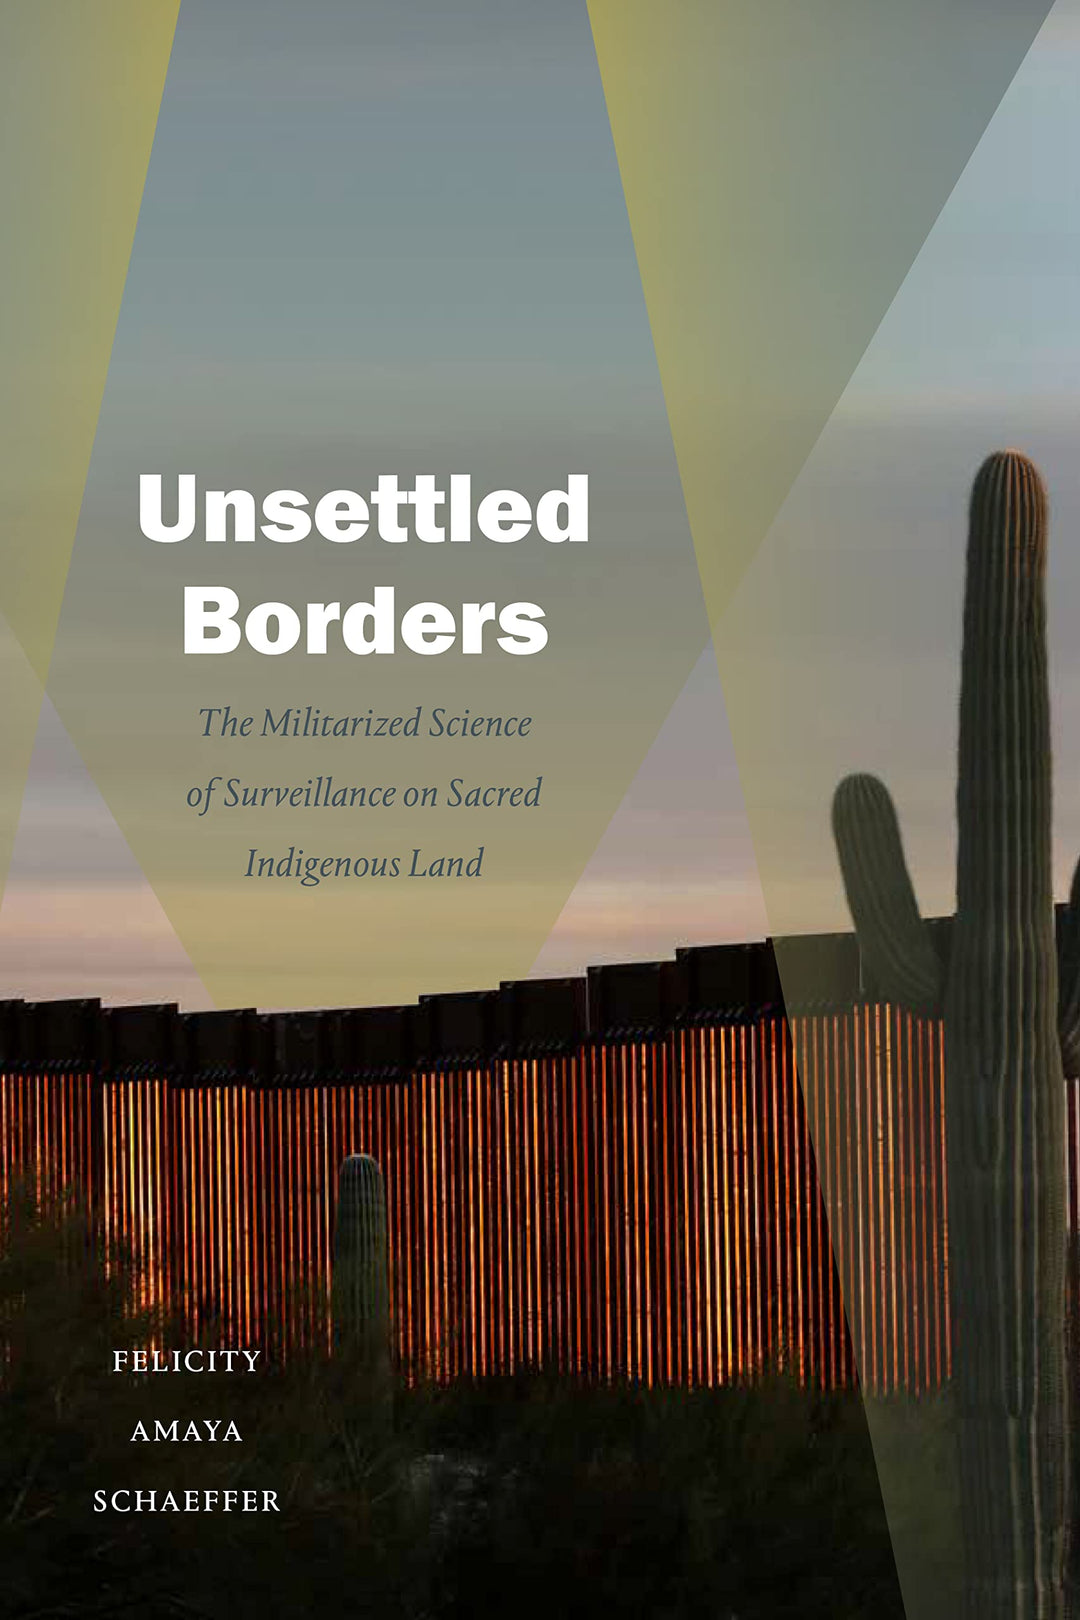 Unsettled Borders: The Militarized Science of Surveillance on Sacred Indigenous Land by Felicity Amaya Schaeffer